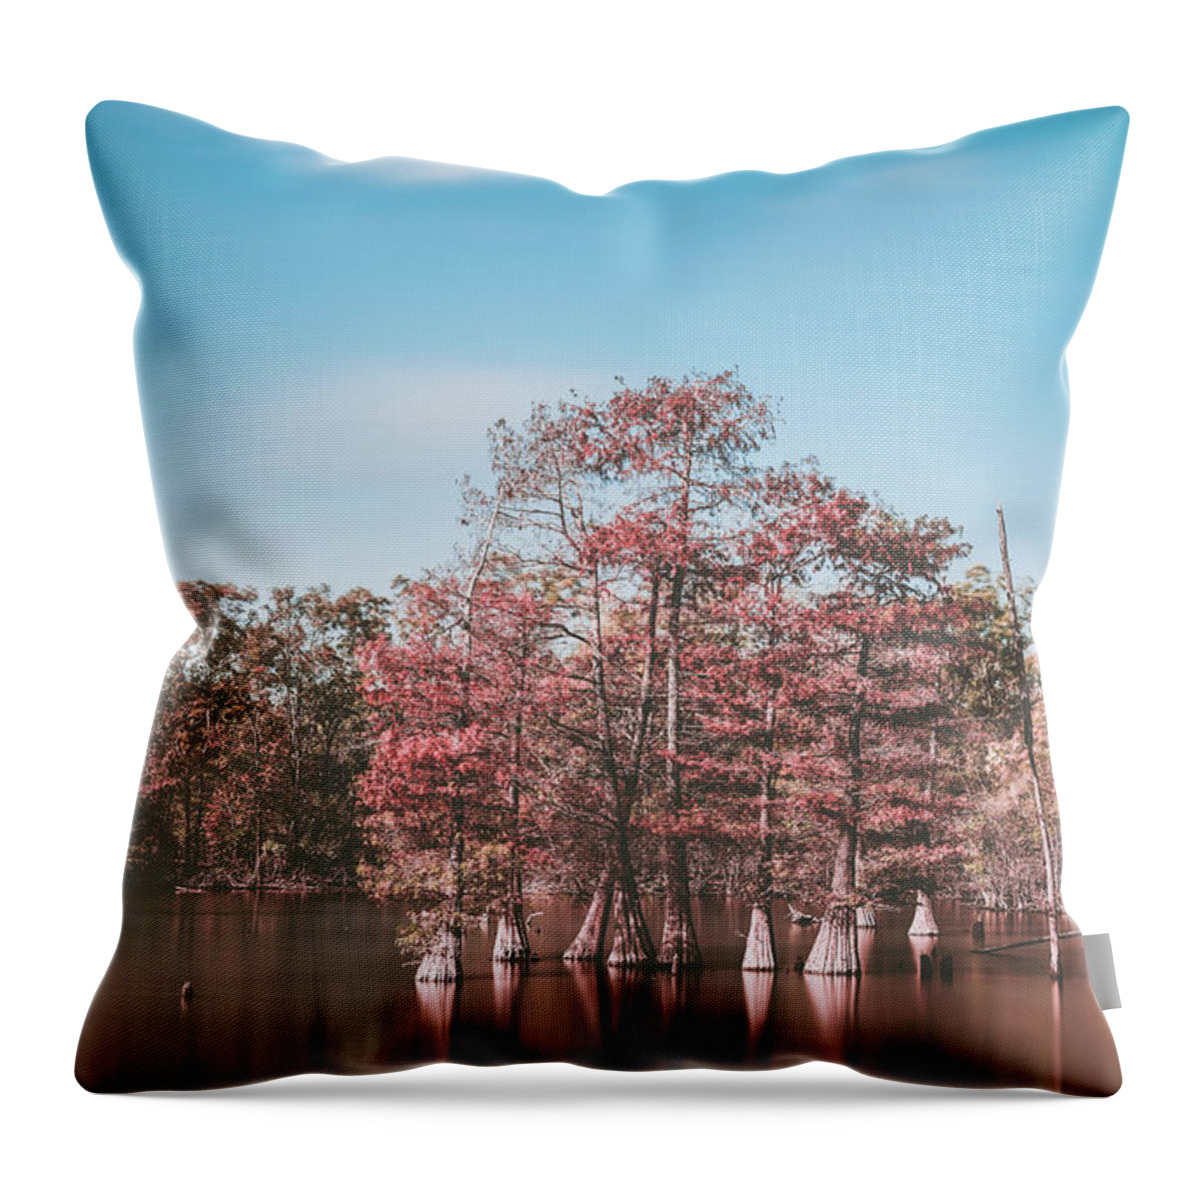 Louisiana Throw Pillow featuring the photograph Cypress trees in Lake by Mati Krimerman